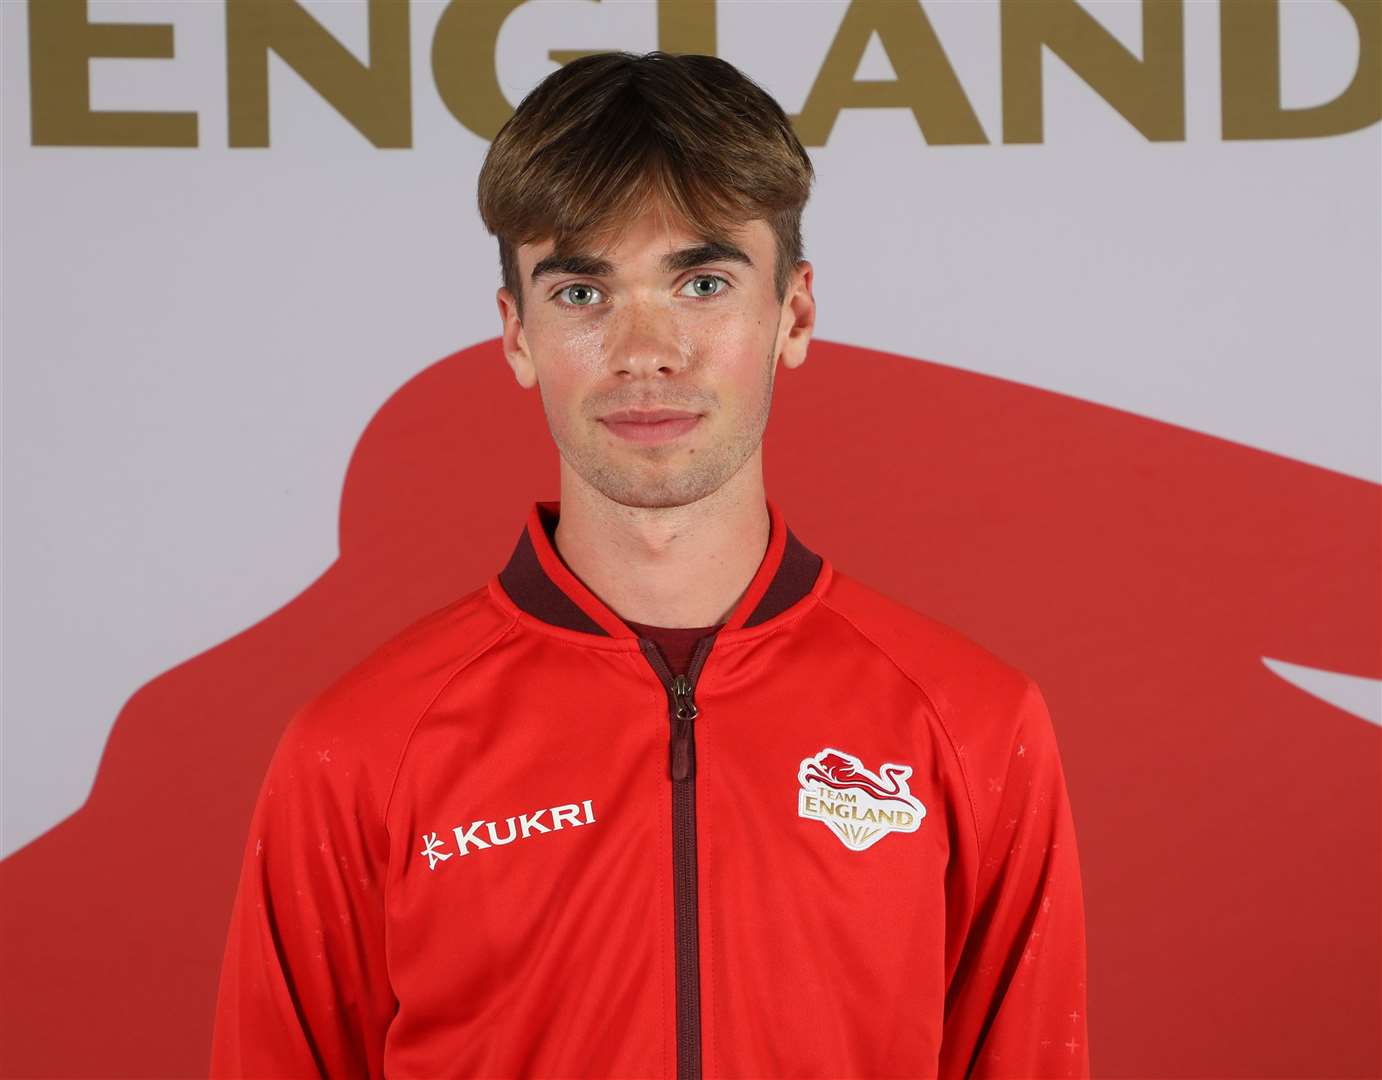 Matthew Stonier last year reached the final in the 1,500m race at a home Commonwealth Games where he came seventh. Picture: Sam Mellish / Team England